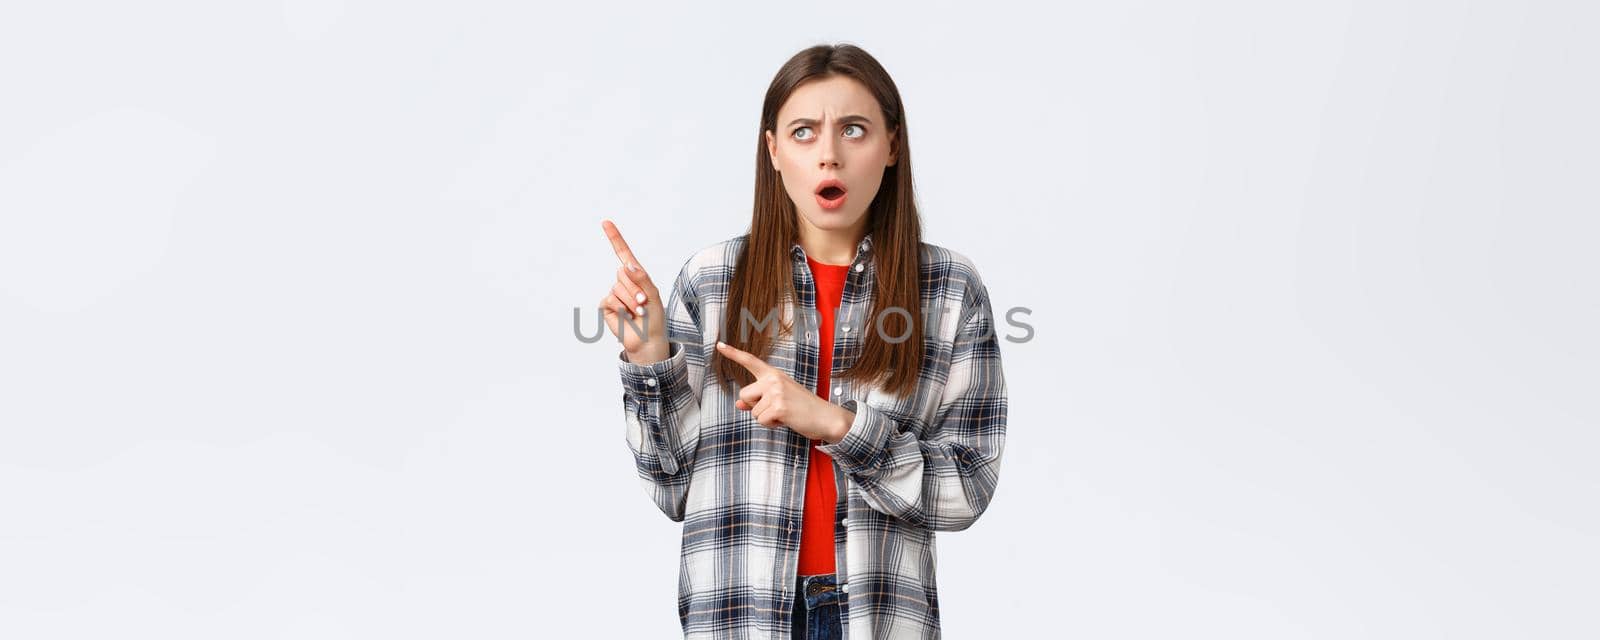 Lifestyle, different emotions, leisure activities concept. Shocked and concerned young pretty woman in checked casual shirt, pointing and looking upper left corner with displeased shook face.